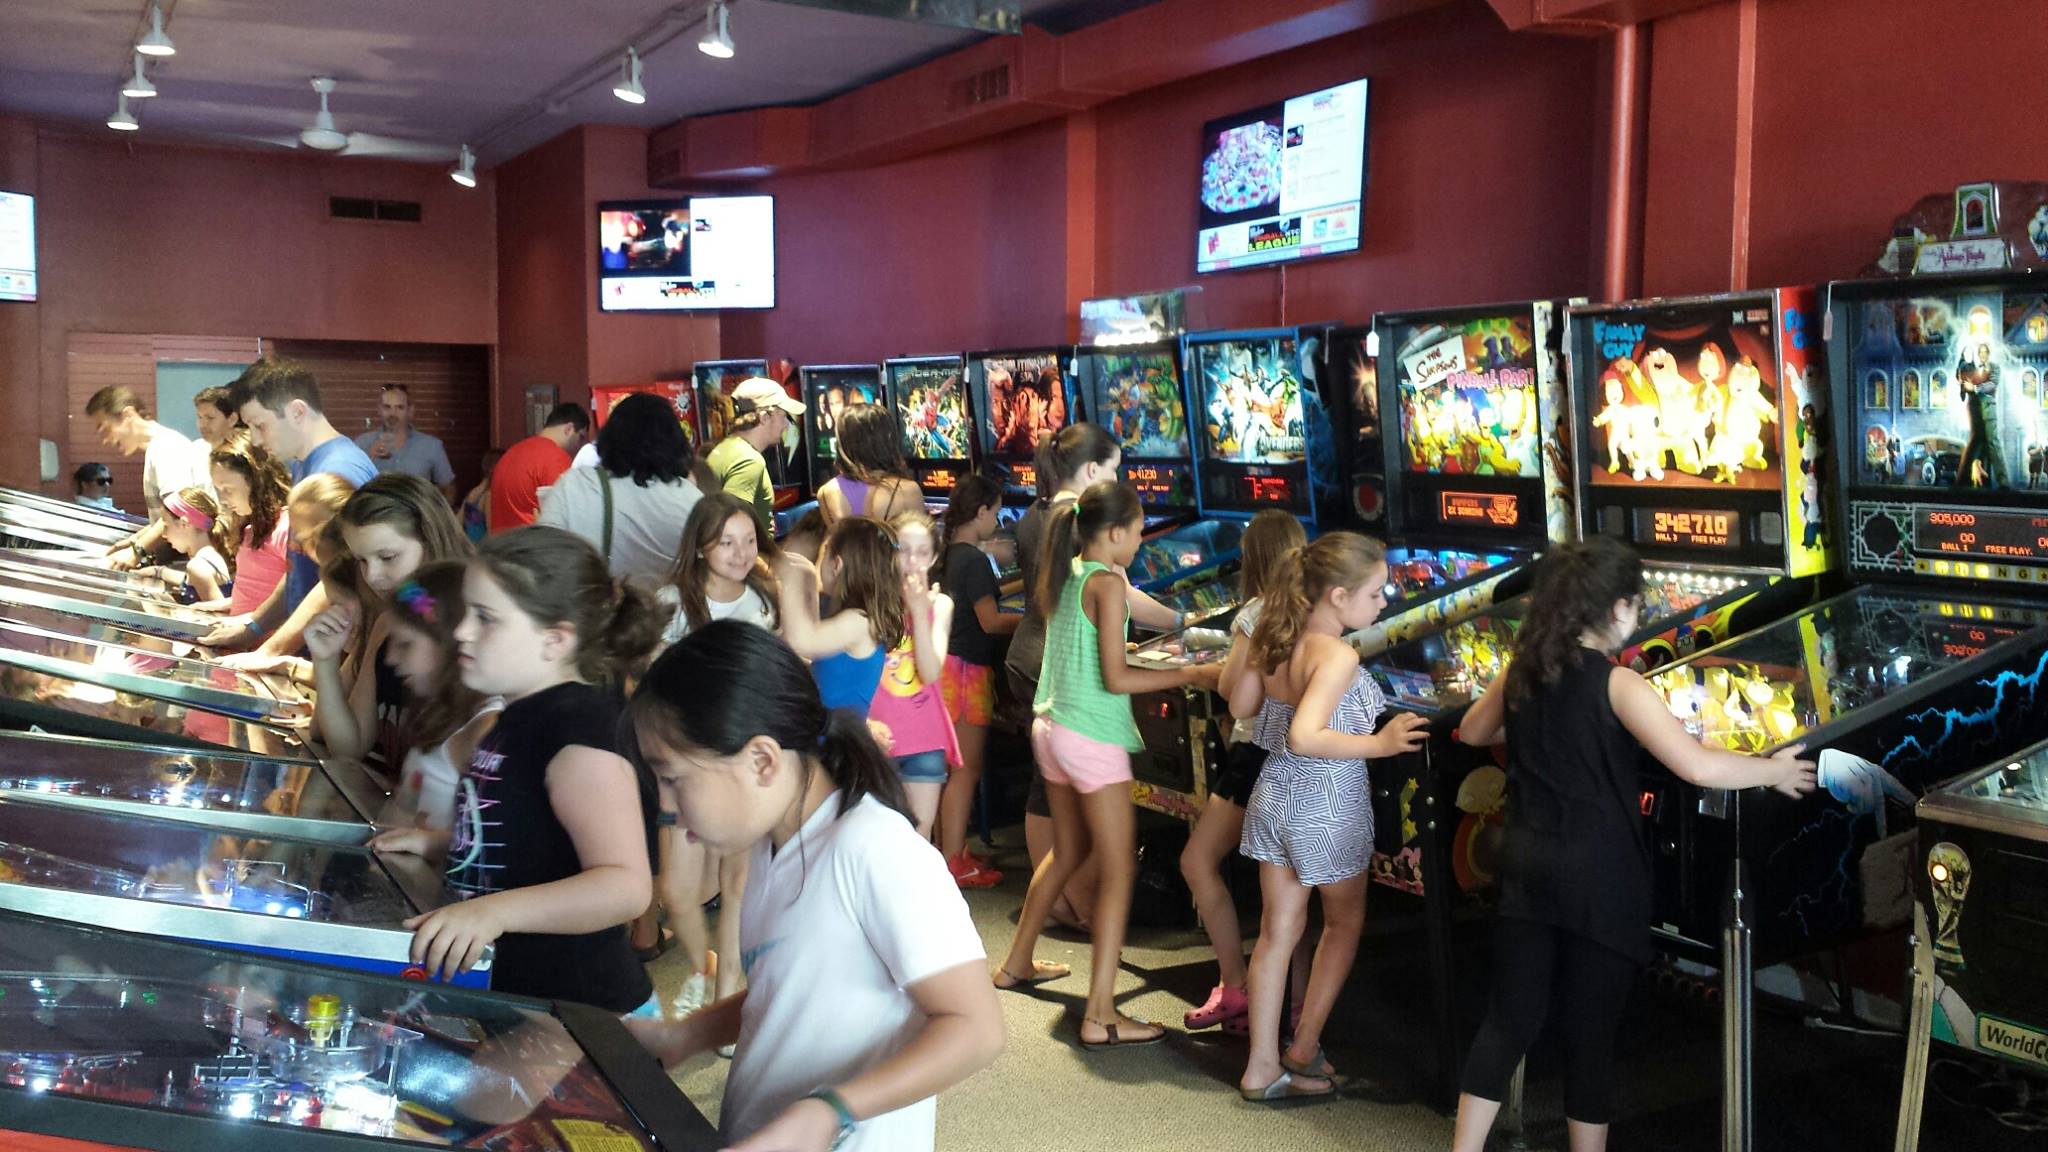 These kids today ... they enjoy pinball!